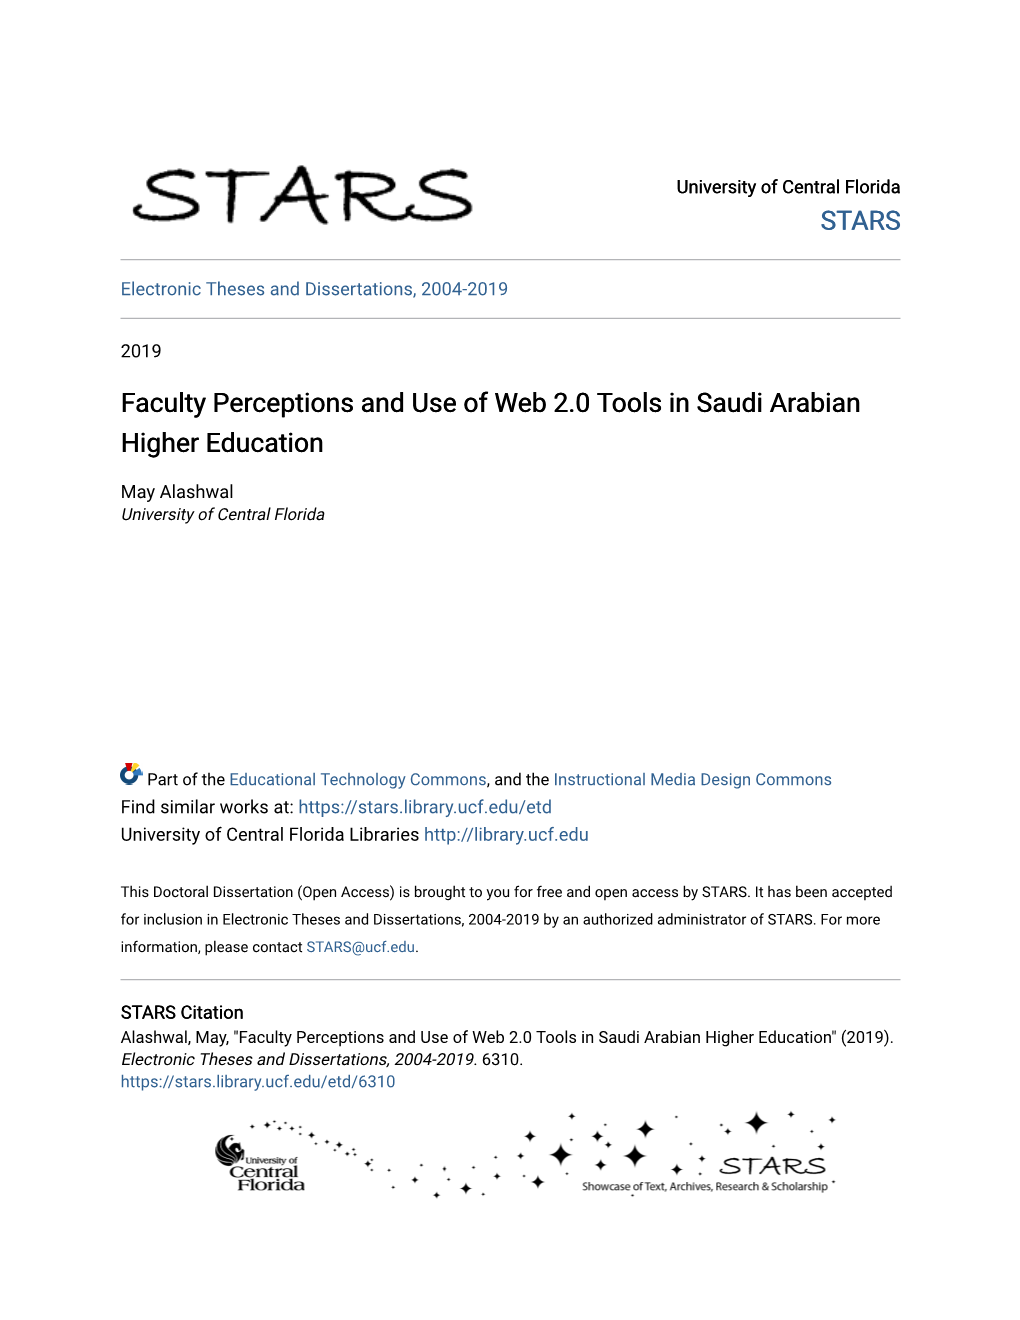 Faculty Perceptions and Use of Web 2.0 Tools in Saudi Arabian Higher Education